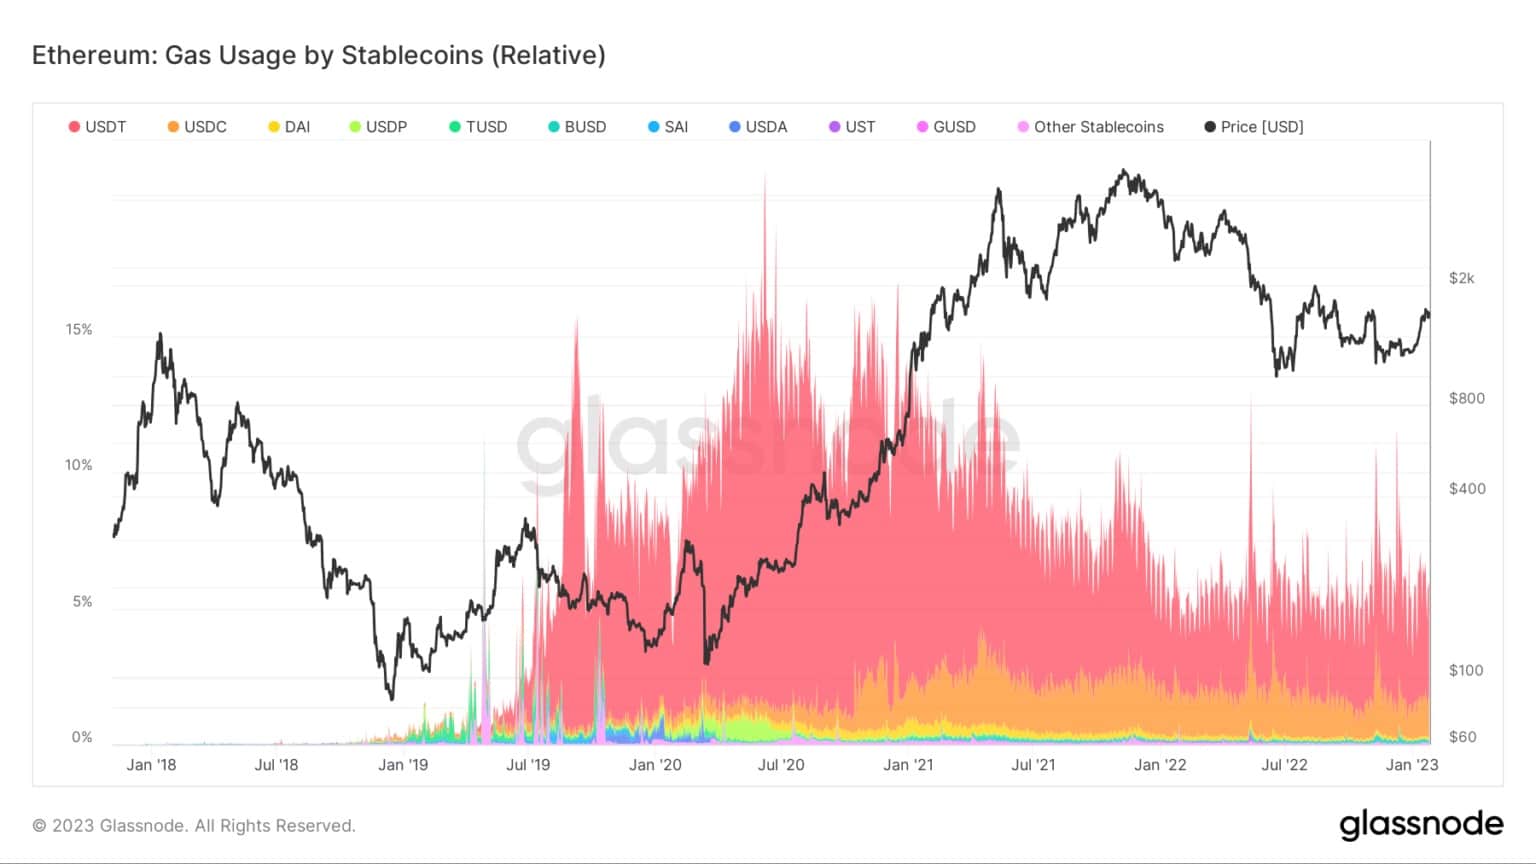 ETH gas usage by stablecoins